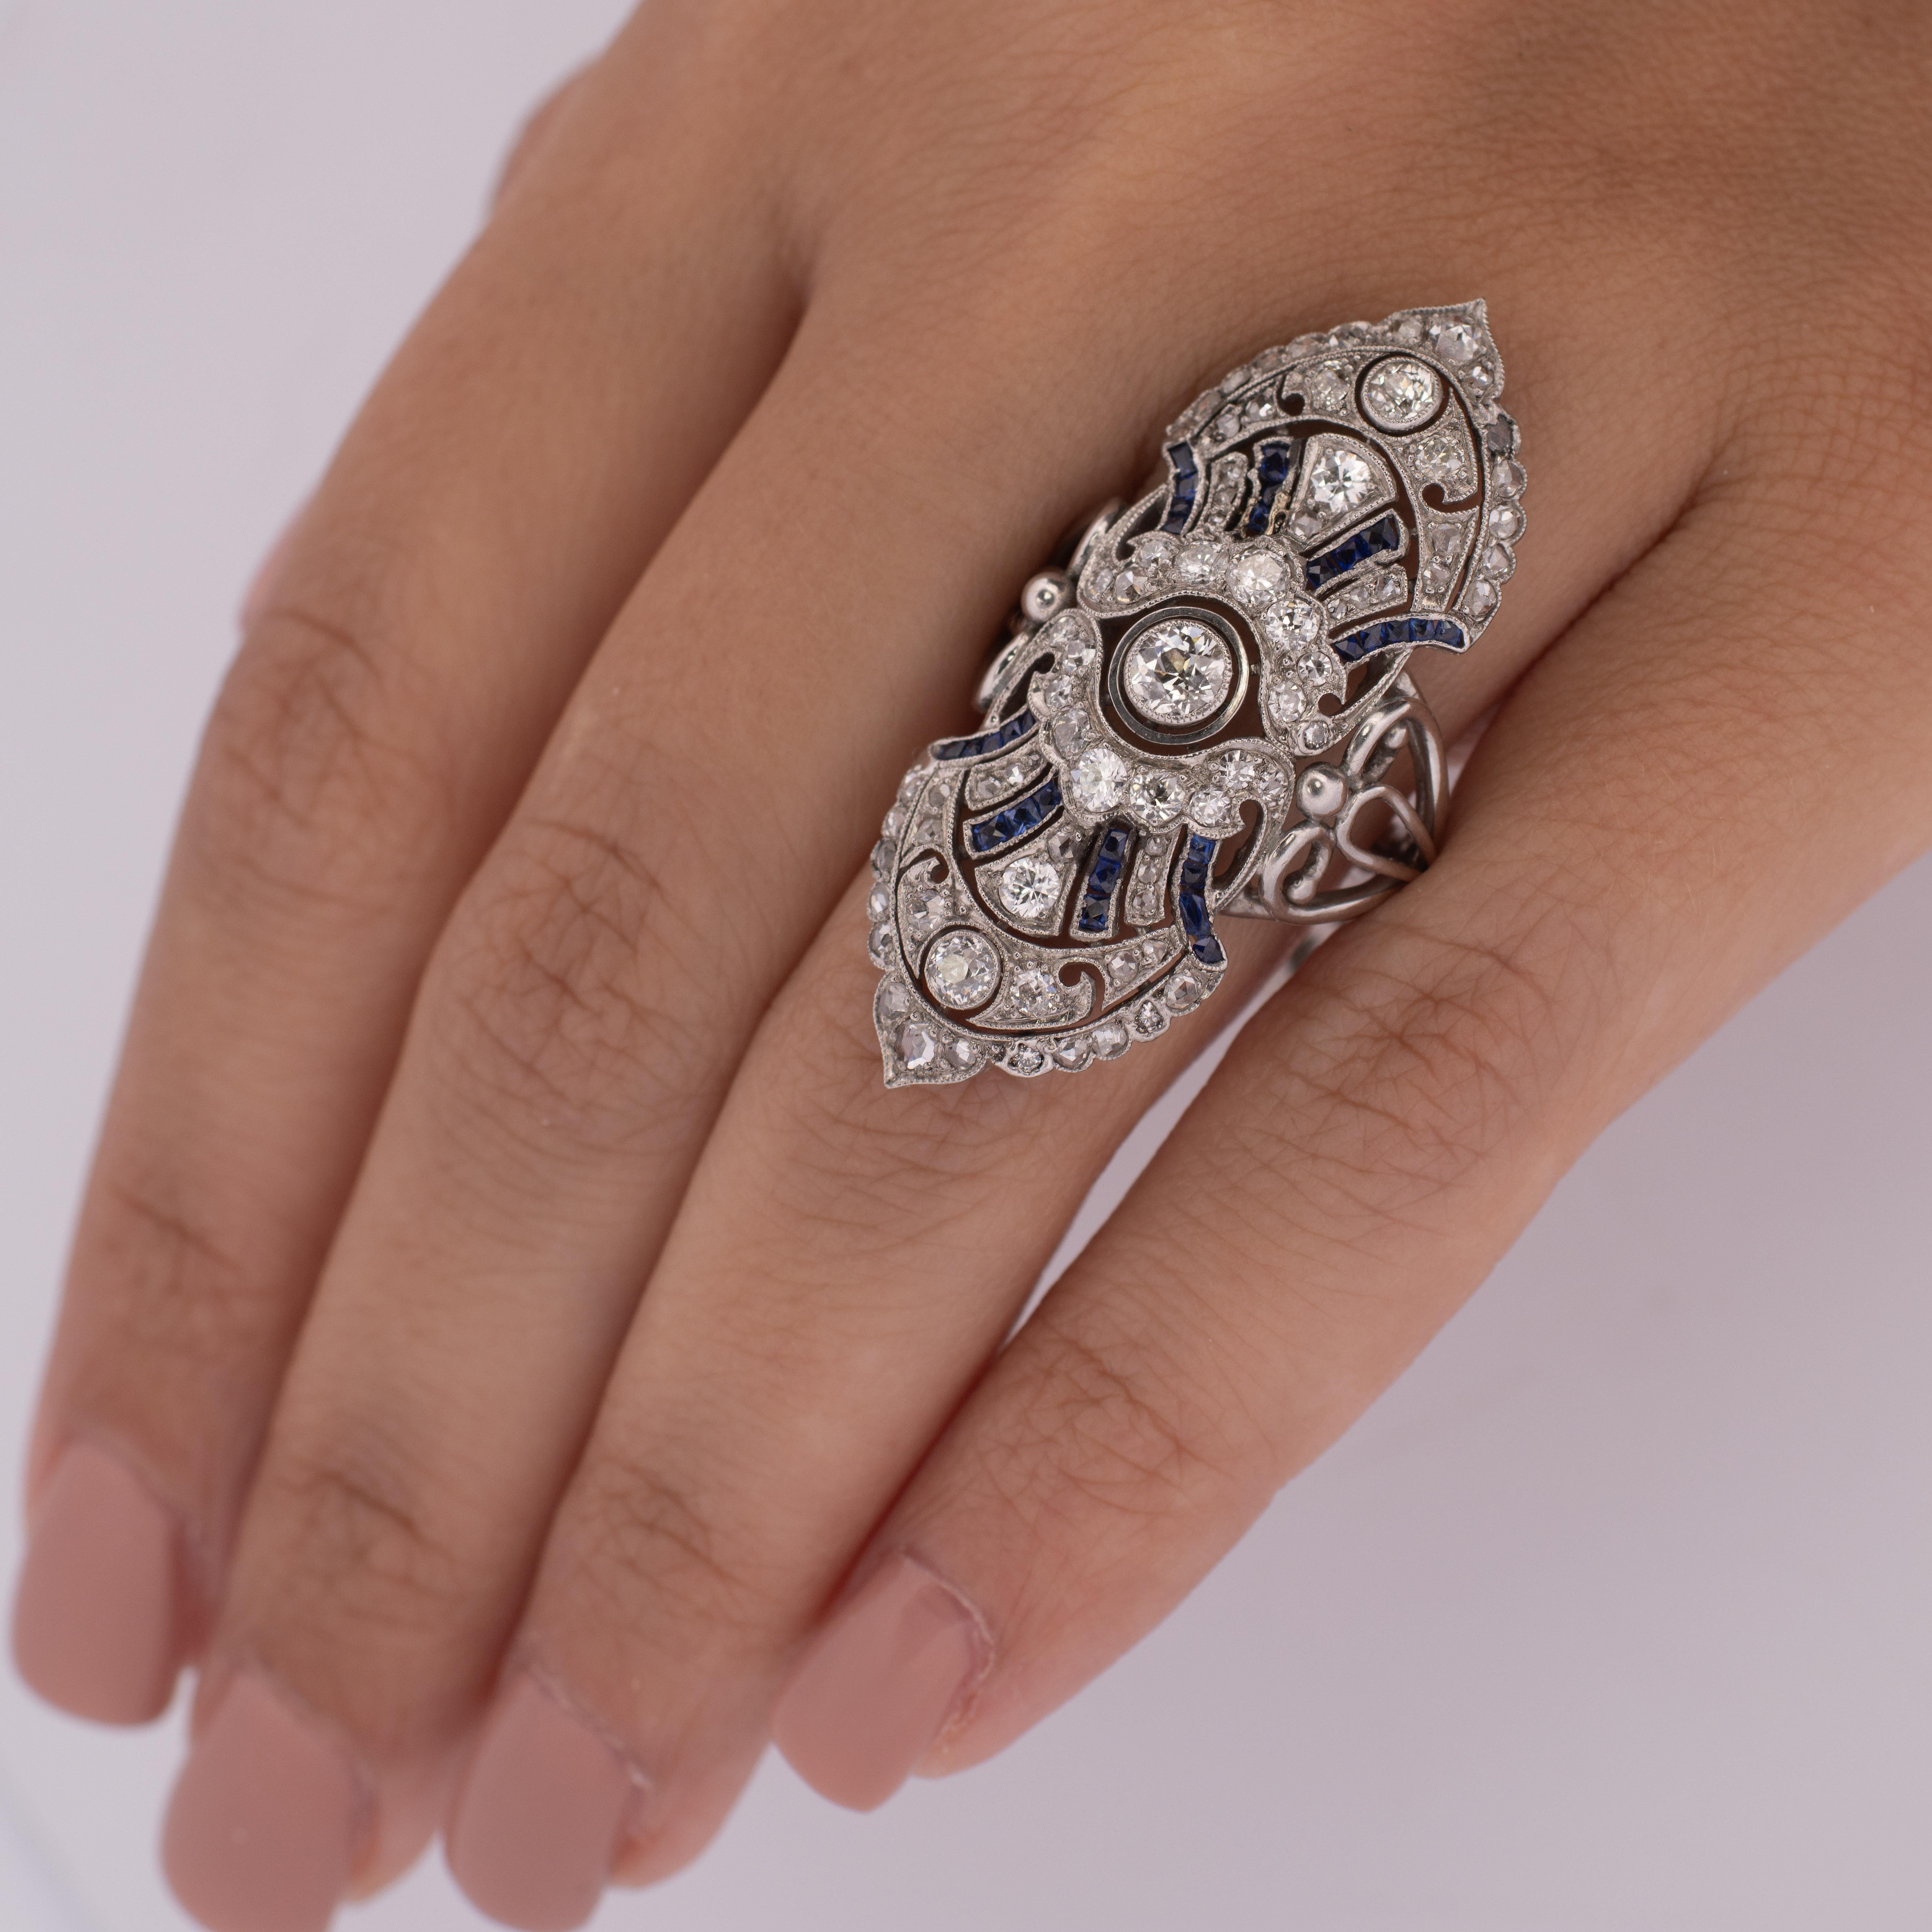 Presenting an impeccably transformed piece—an early 1900s brooch artfully reimagined into an extraordinary statement ring. The captivating shield design, masterfully forged in platinum, showcases a mesmerizing ensemble of 1.73 carats worth of